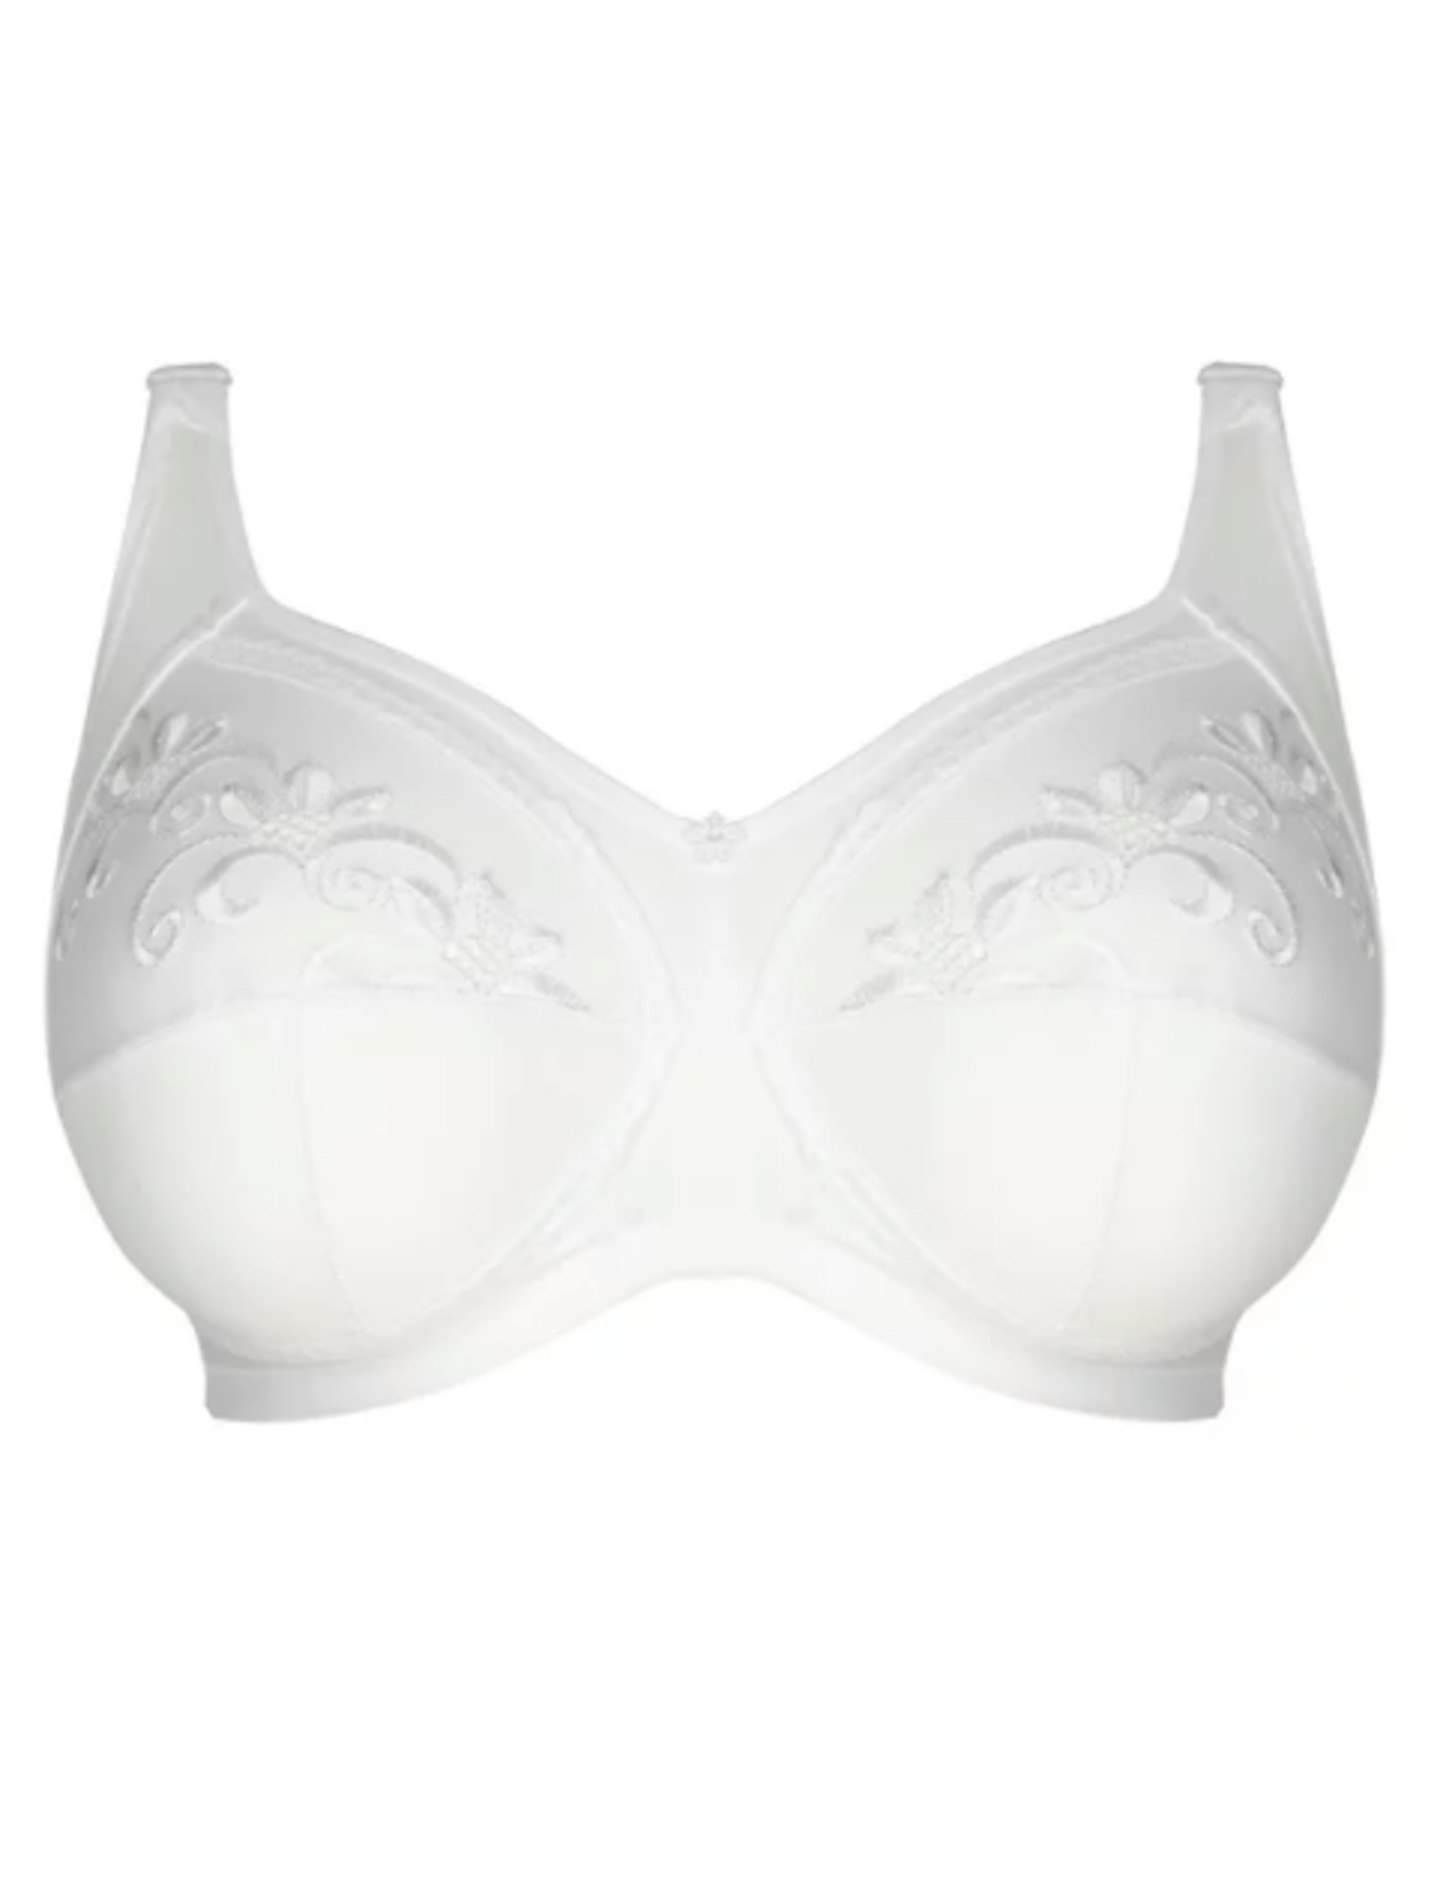 Embroidered Non Wired Total Support Bra, £18